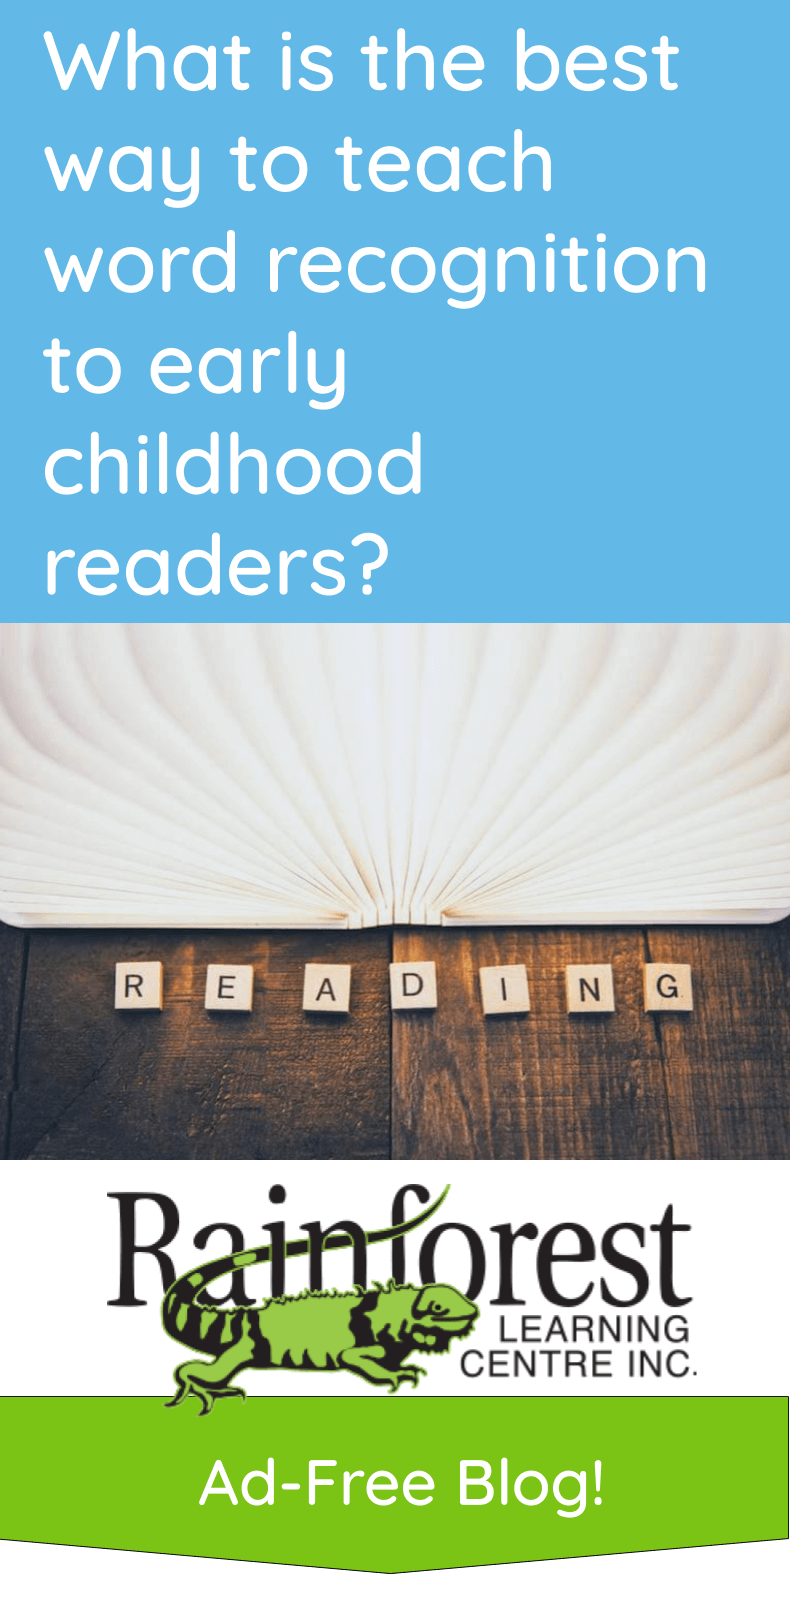 What is the best way to teach word recognition to early childhood readers? - article pinterest image